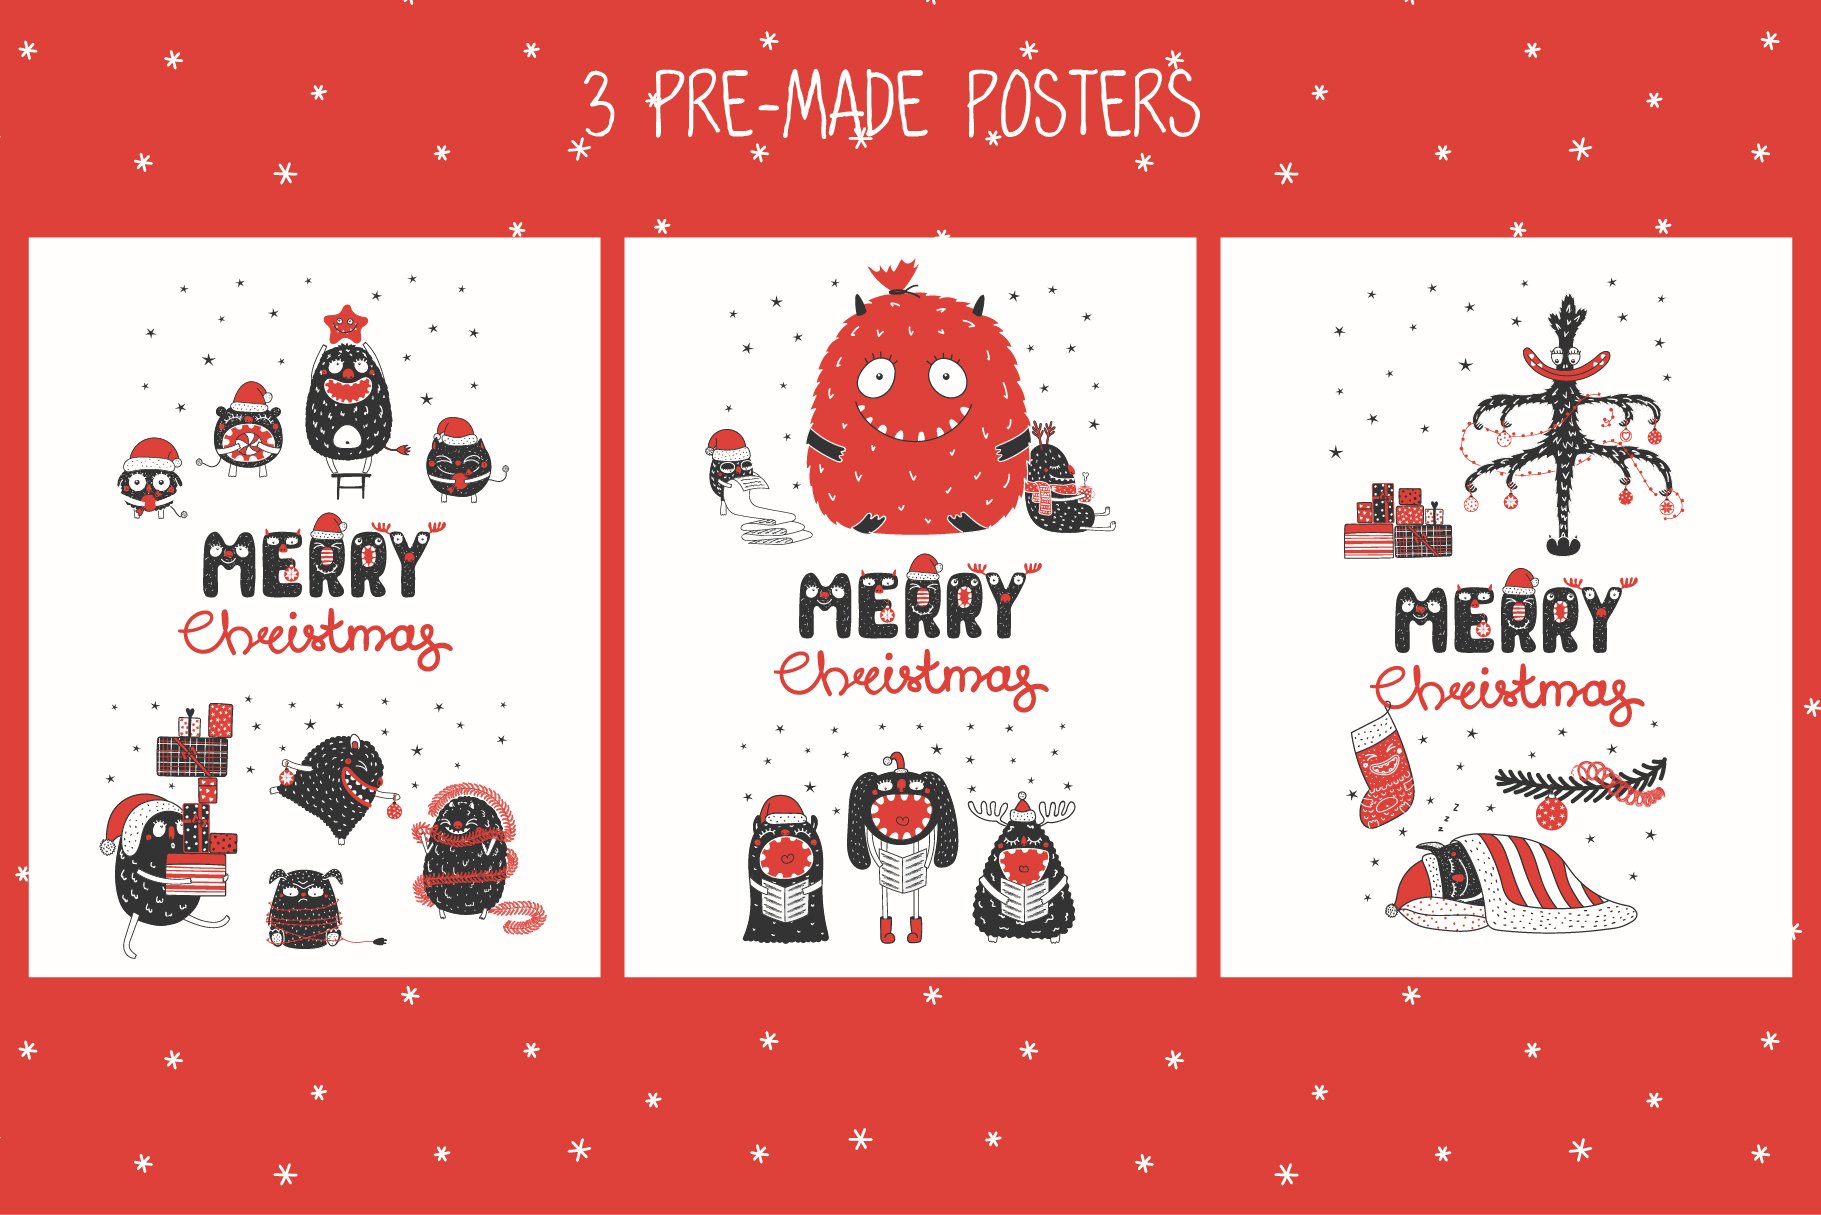 Christmas pre made posters with monsters.